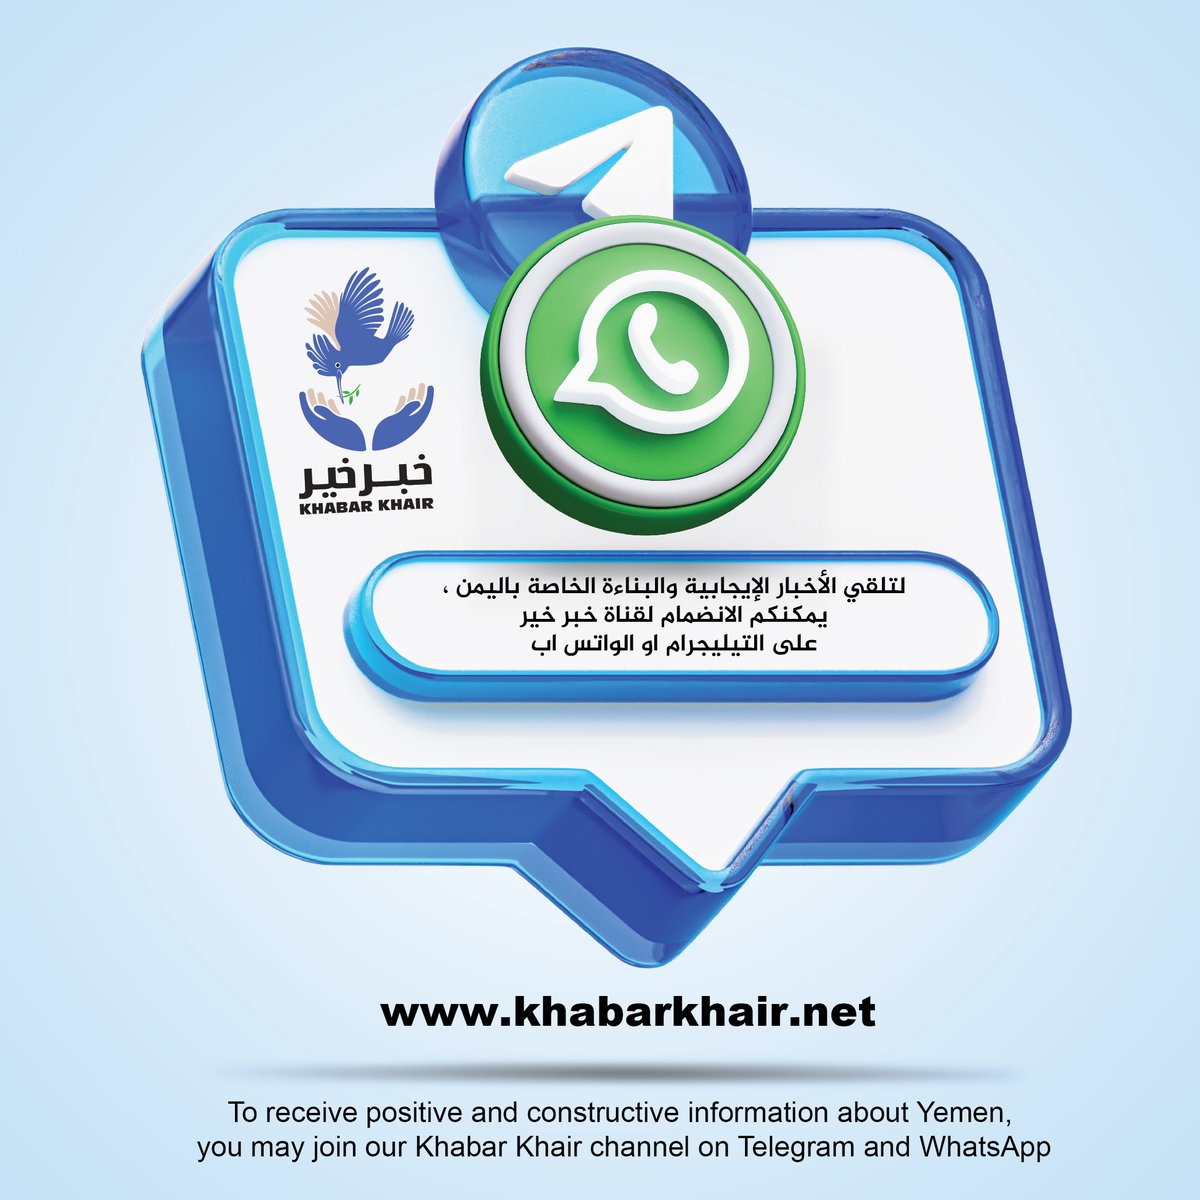 To receive positive and constructive information about Yemen, you may join Khabar Khair channel on Telegram or WhatsApp through the following links:

WhatsApp:
whatsapp.com/channel/0029Va…

Telegram:
telegram.me/khabarkhair

#YemenCantWait
#Yemen